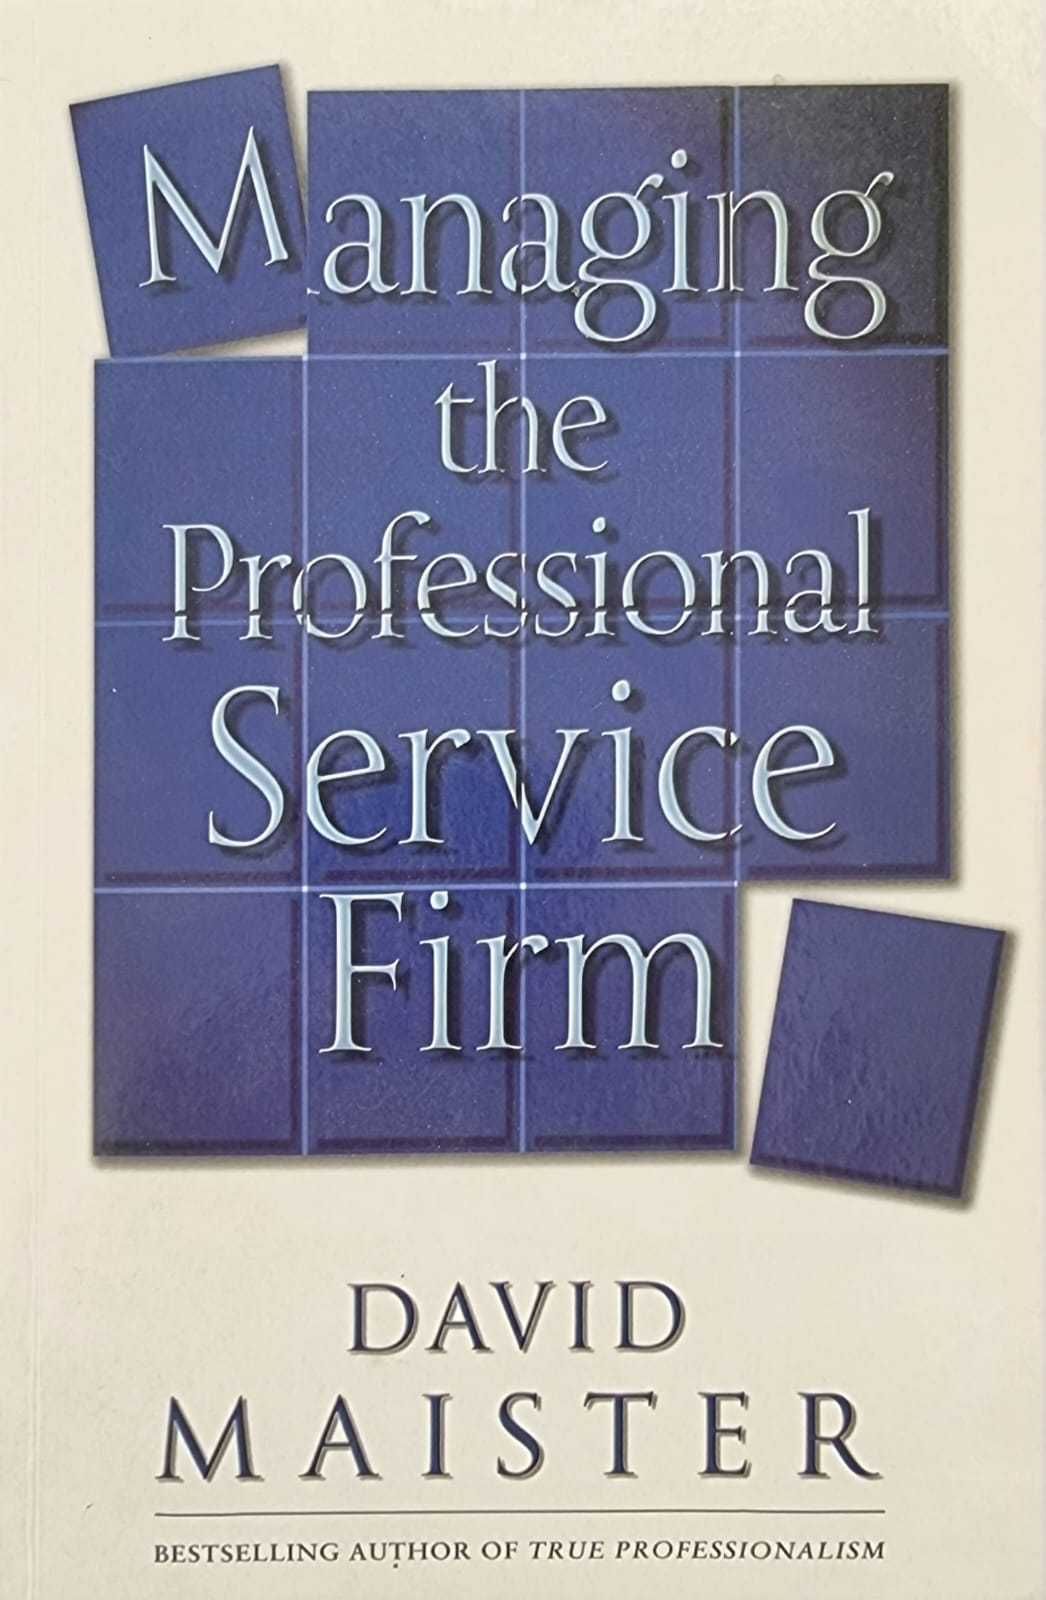 David Maister, Managing the Professional Service Firm